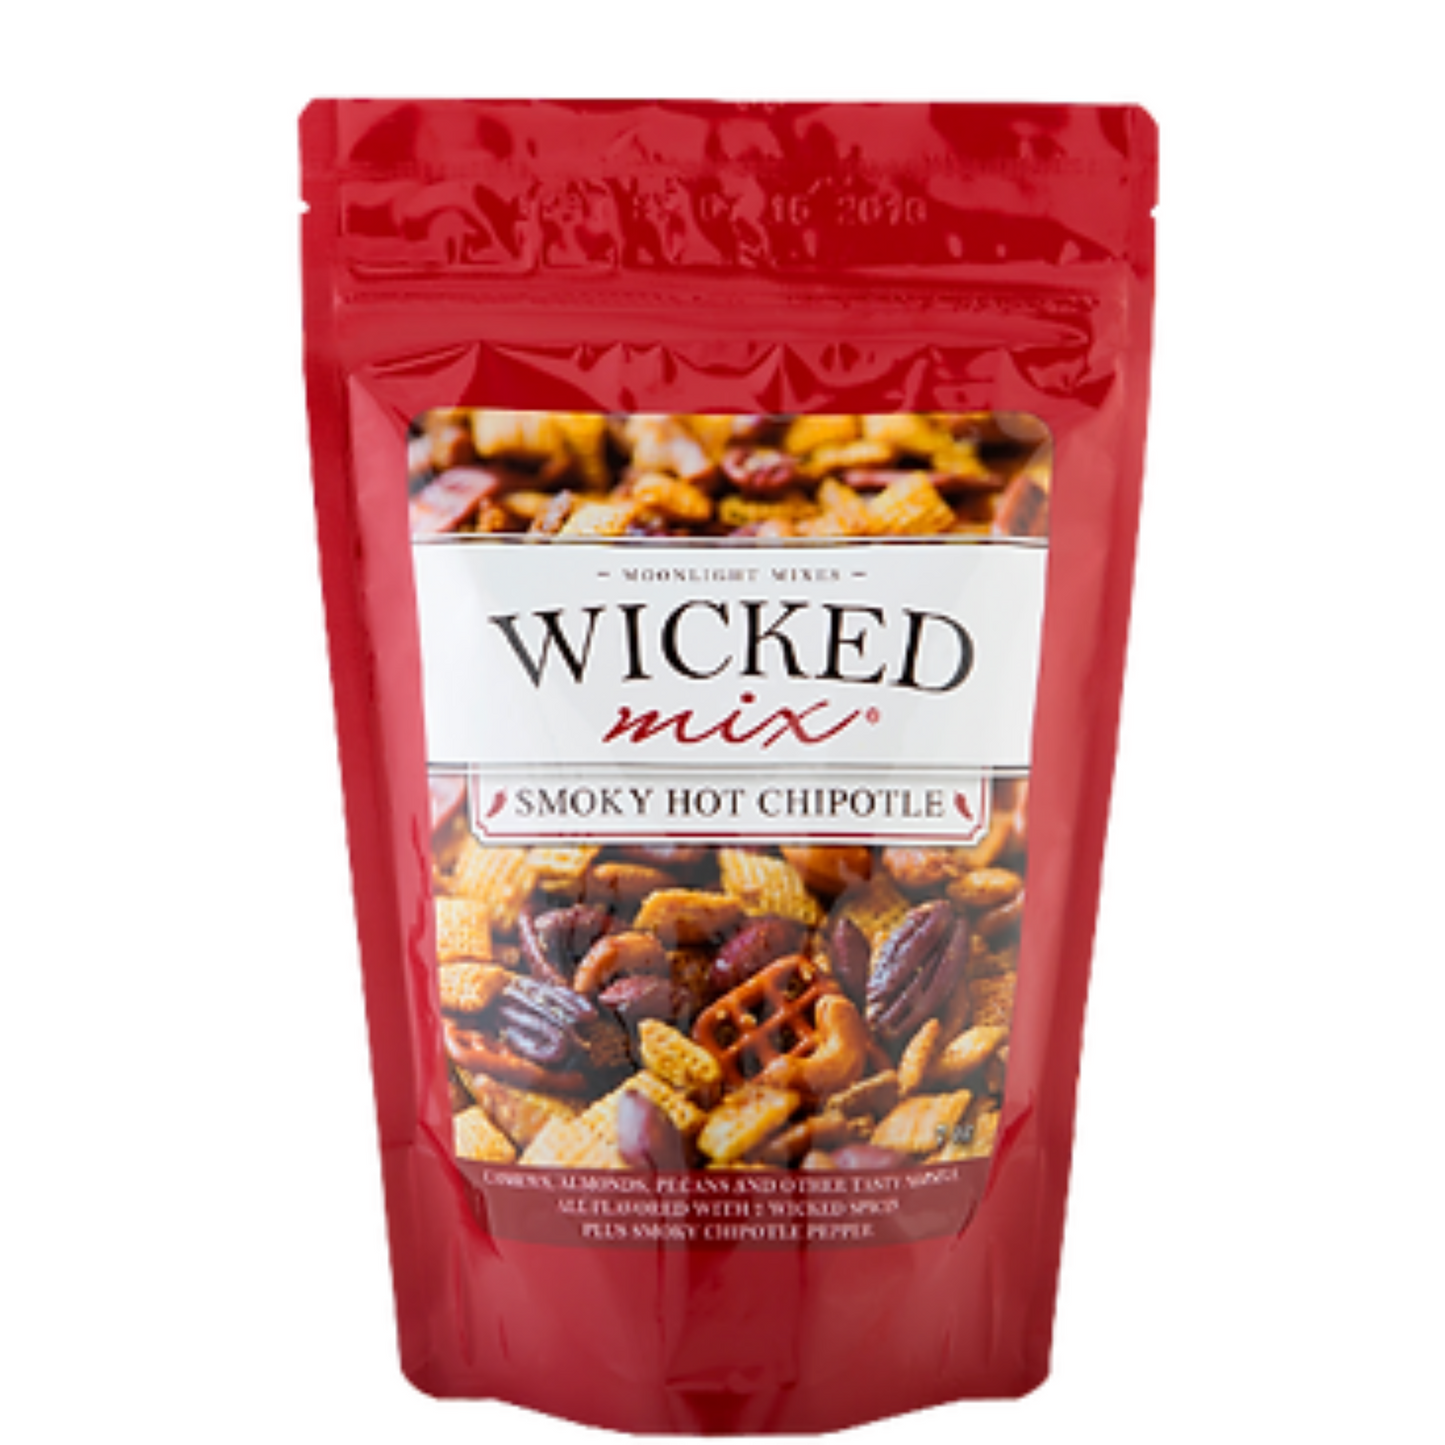 Smoky Hot Chipotle wicked mix